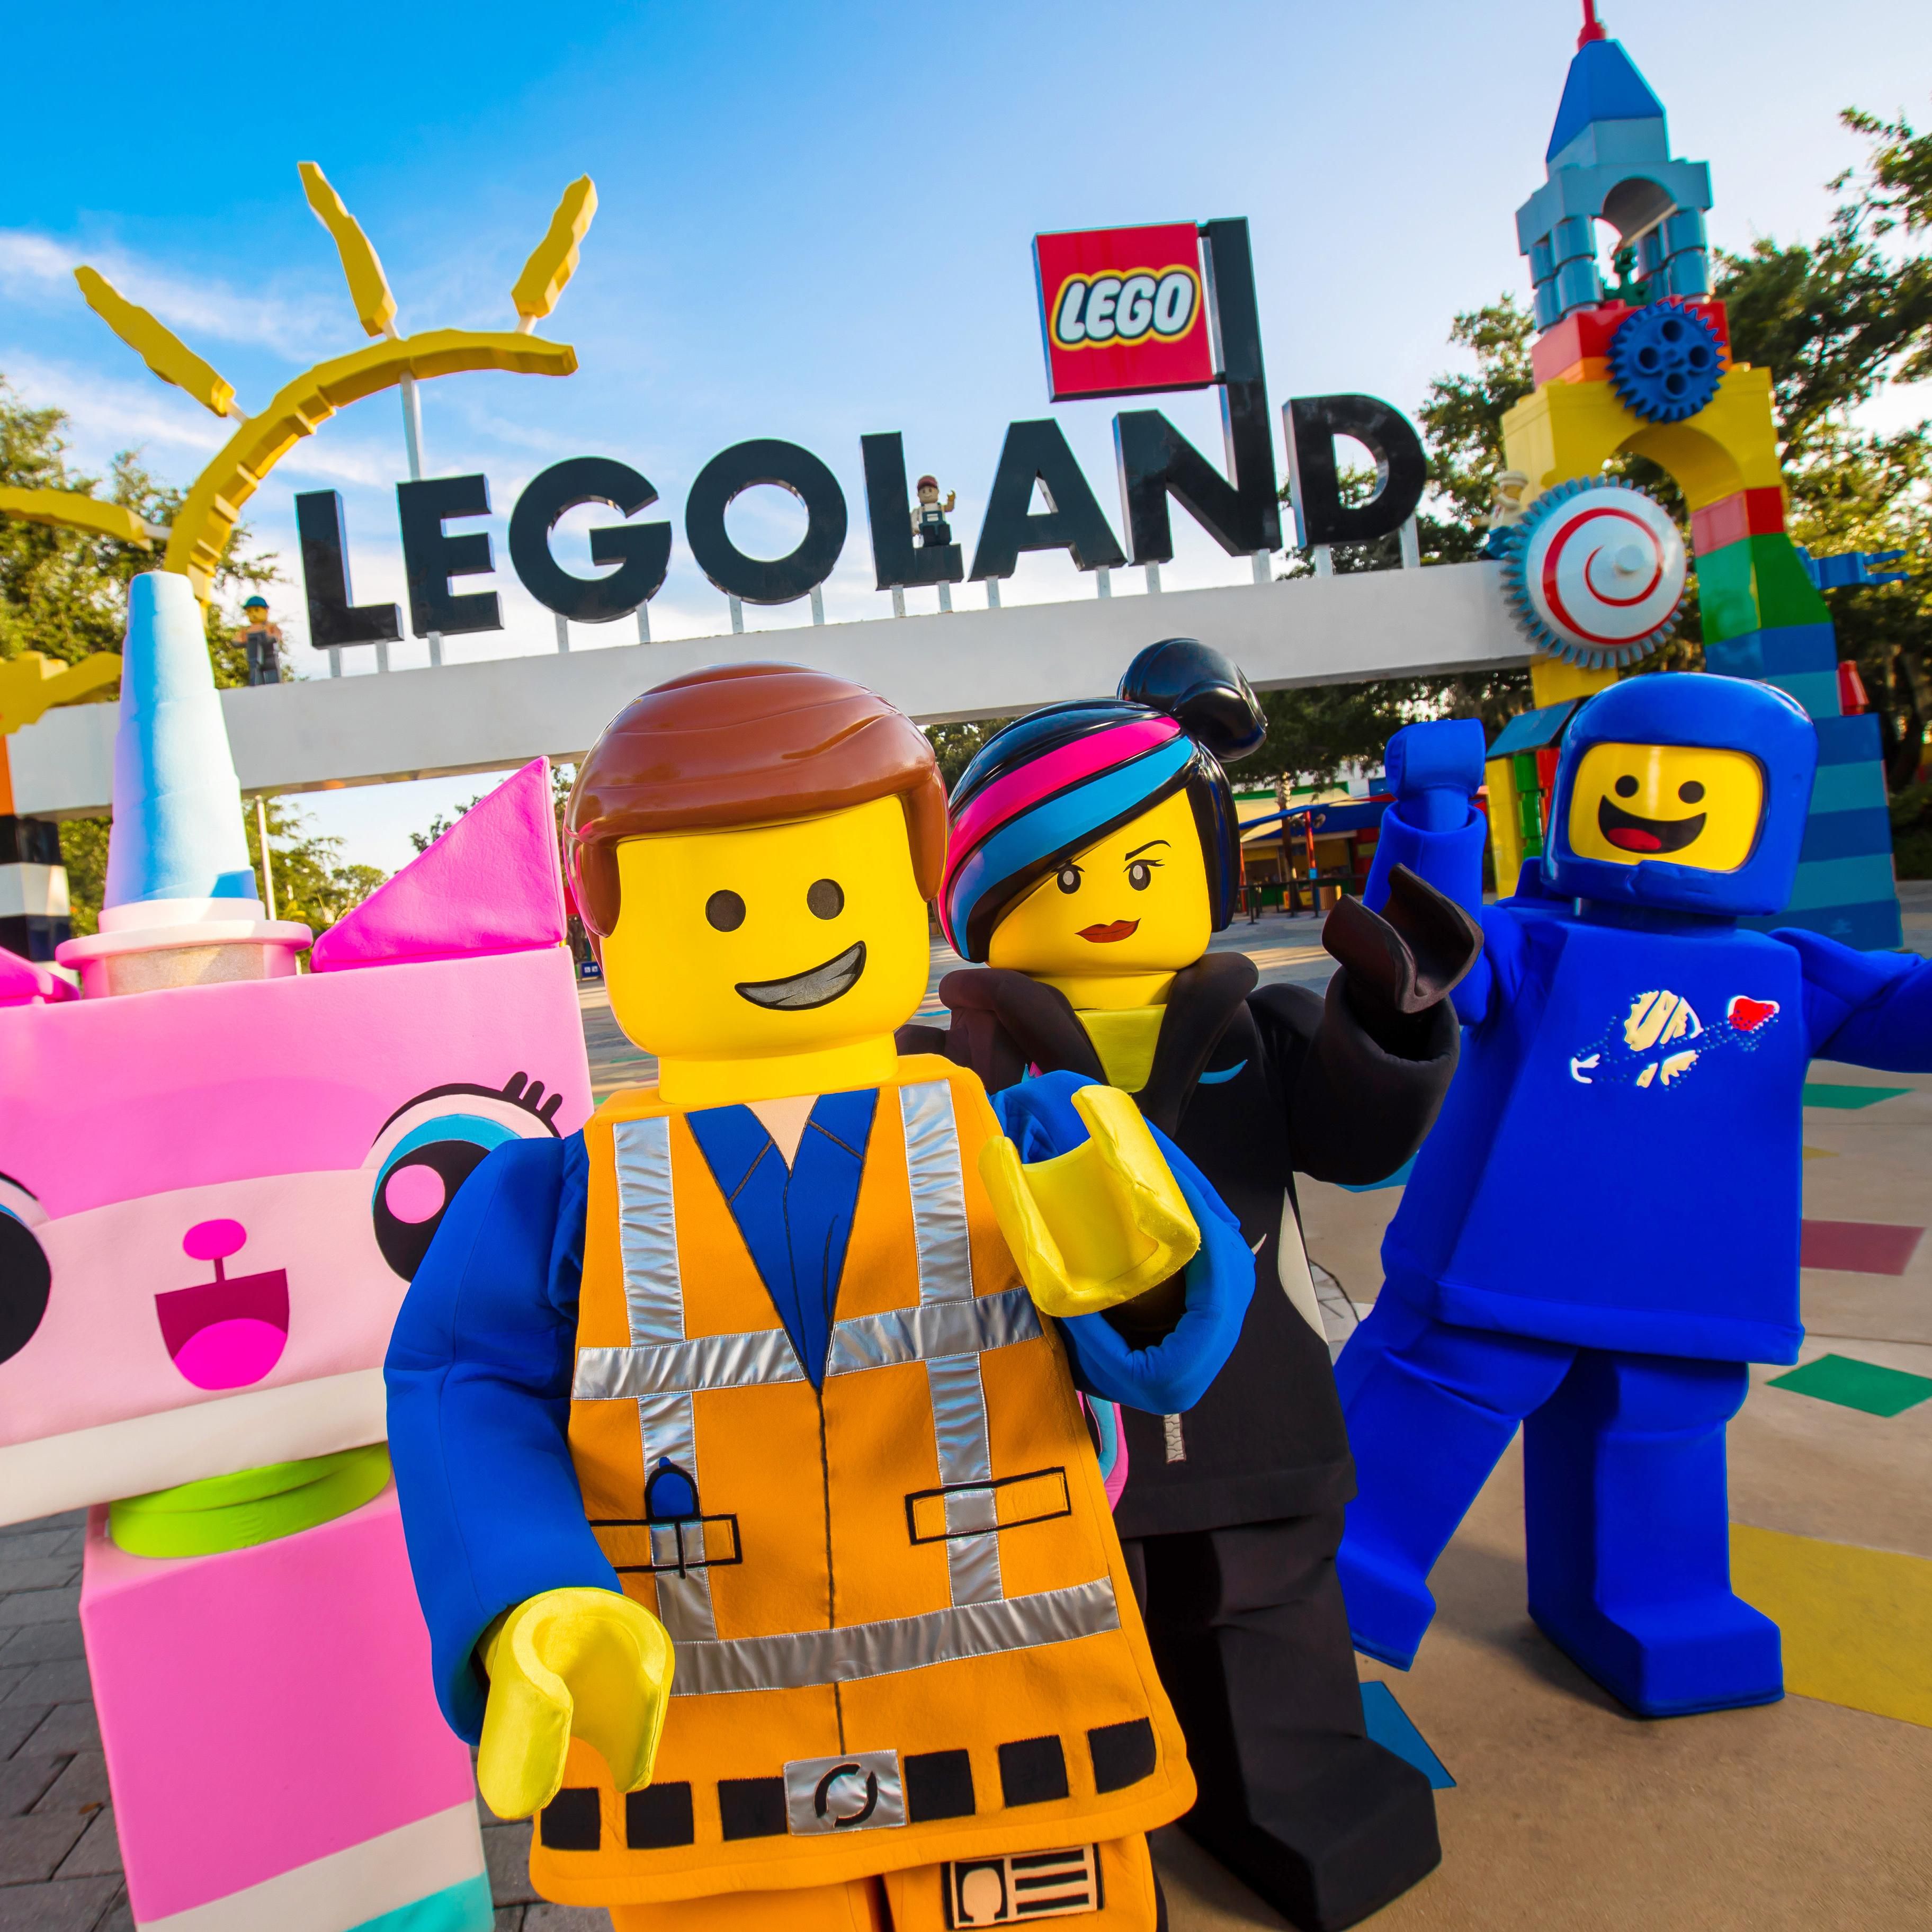 Theme park characters from Legoland